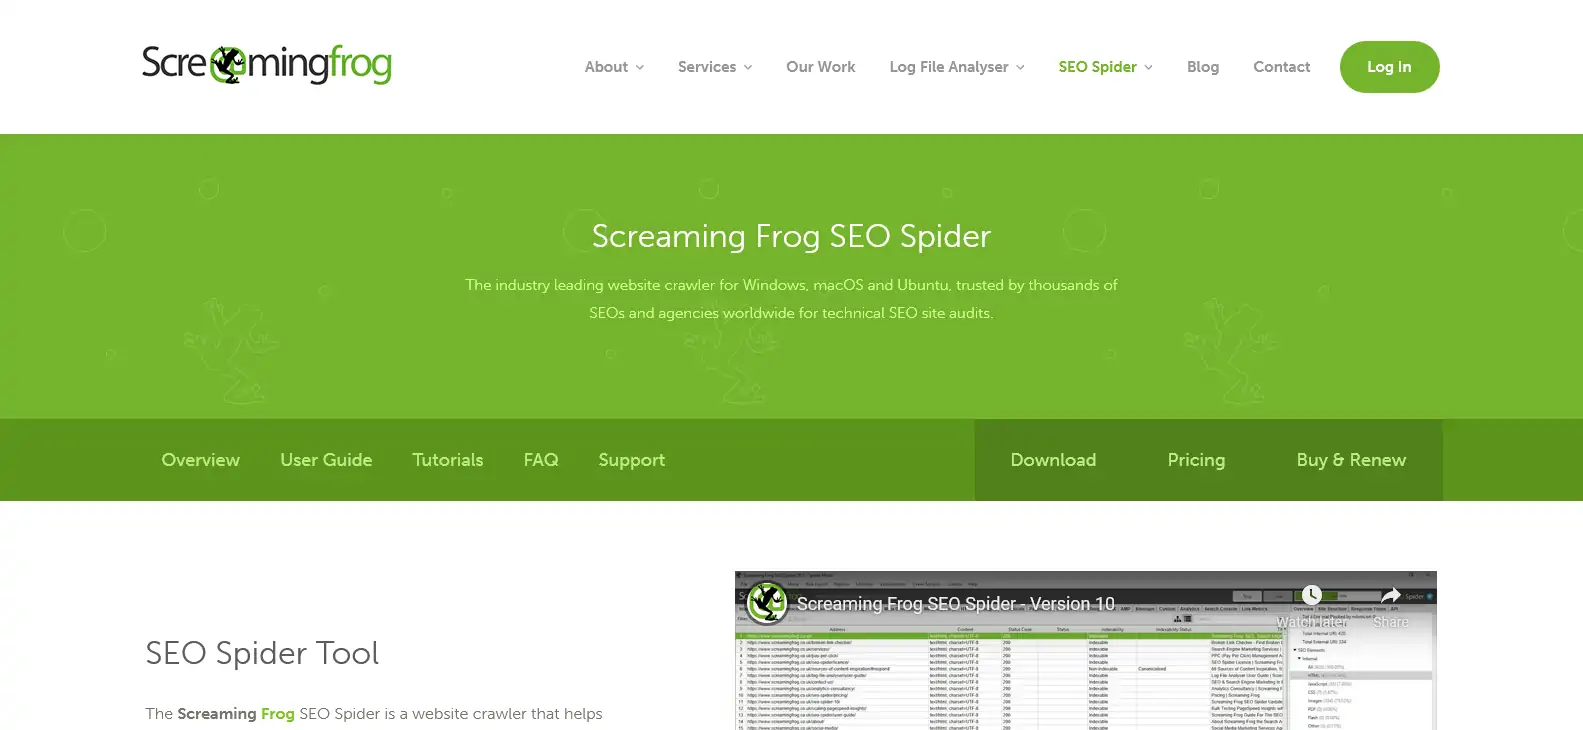 Screaming Frog SEO Spider - SEO Tools: 18 SEO Tools Used by SEO Experts